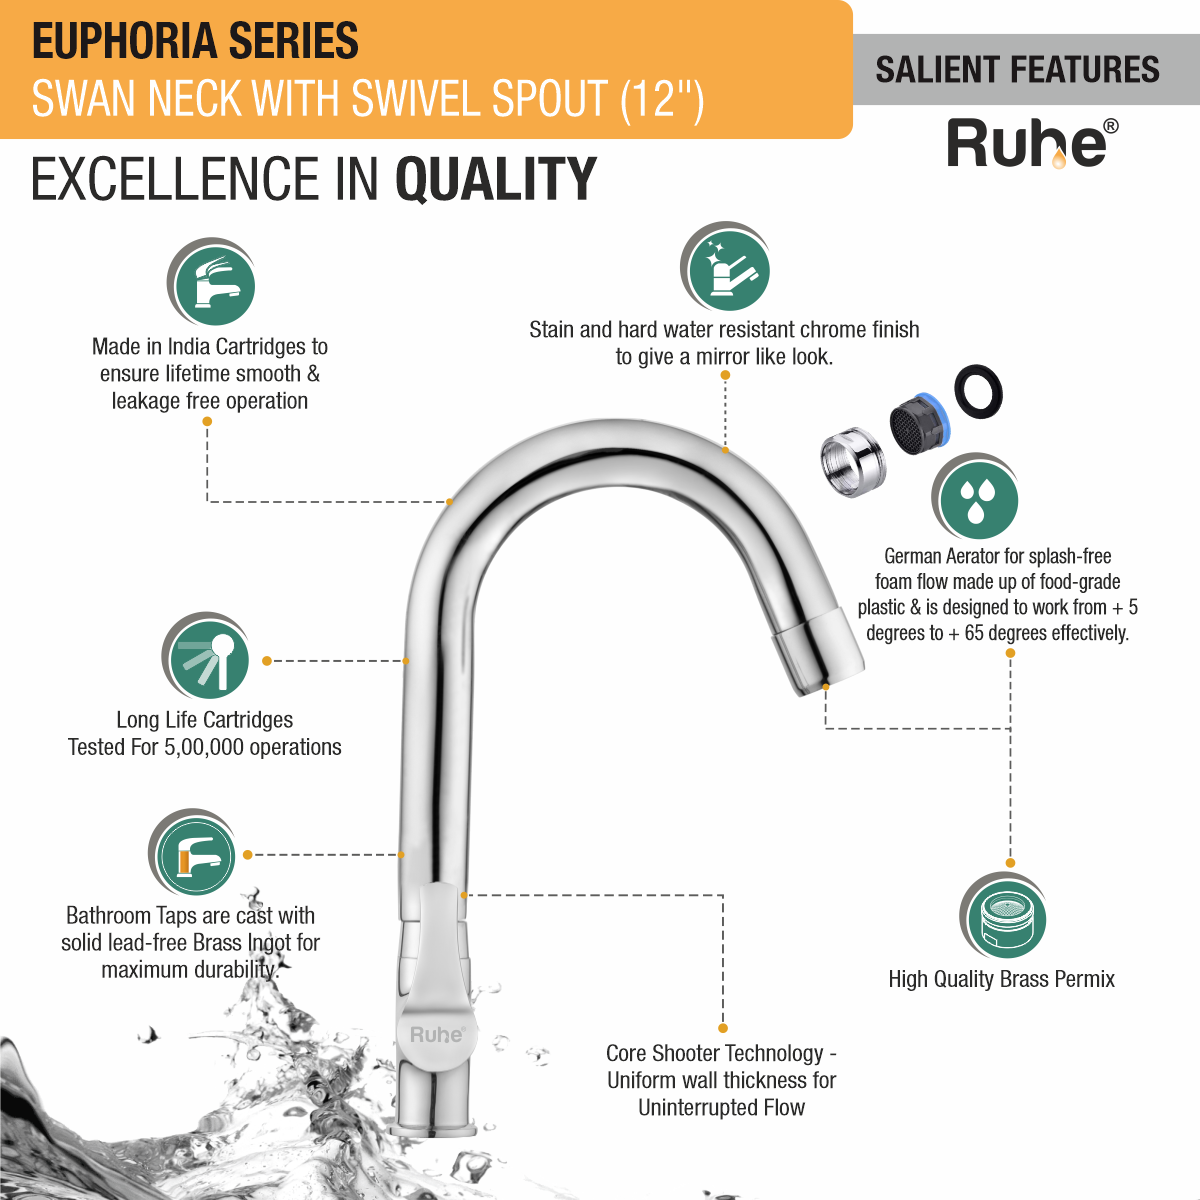 Euphoria Swan Neck with Small (12 inches) Round Swivel Spout Faucet features